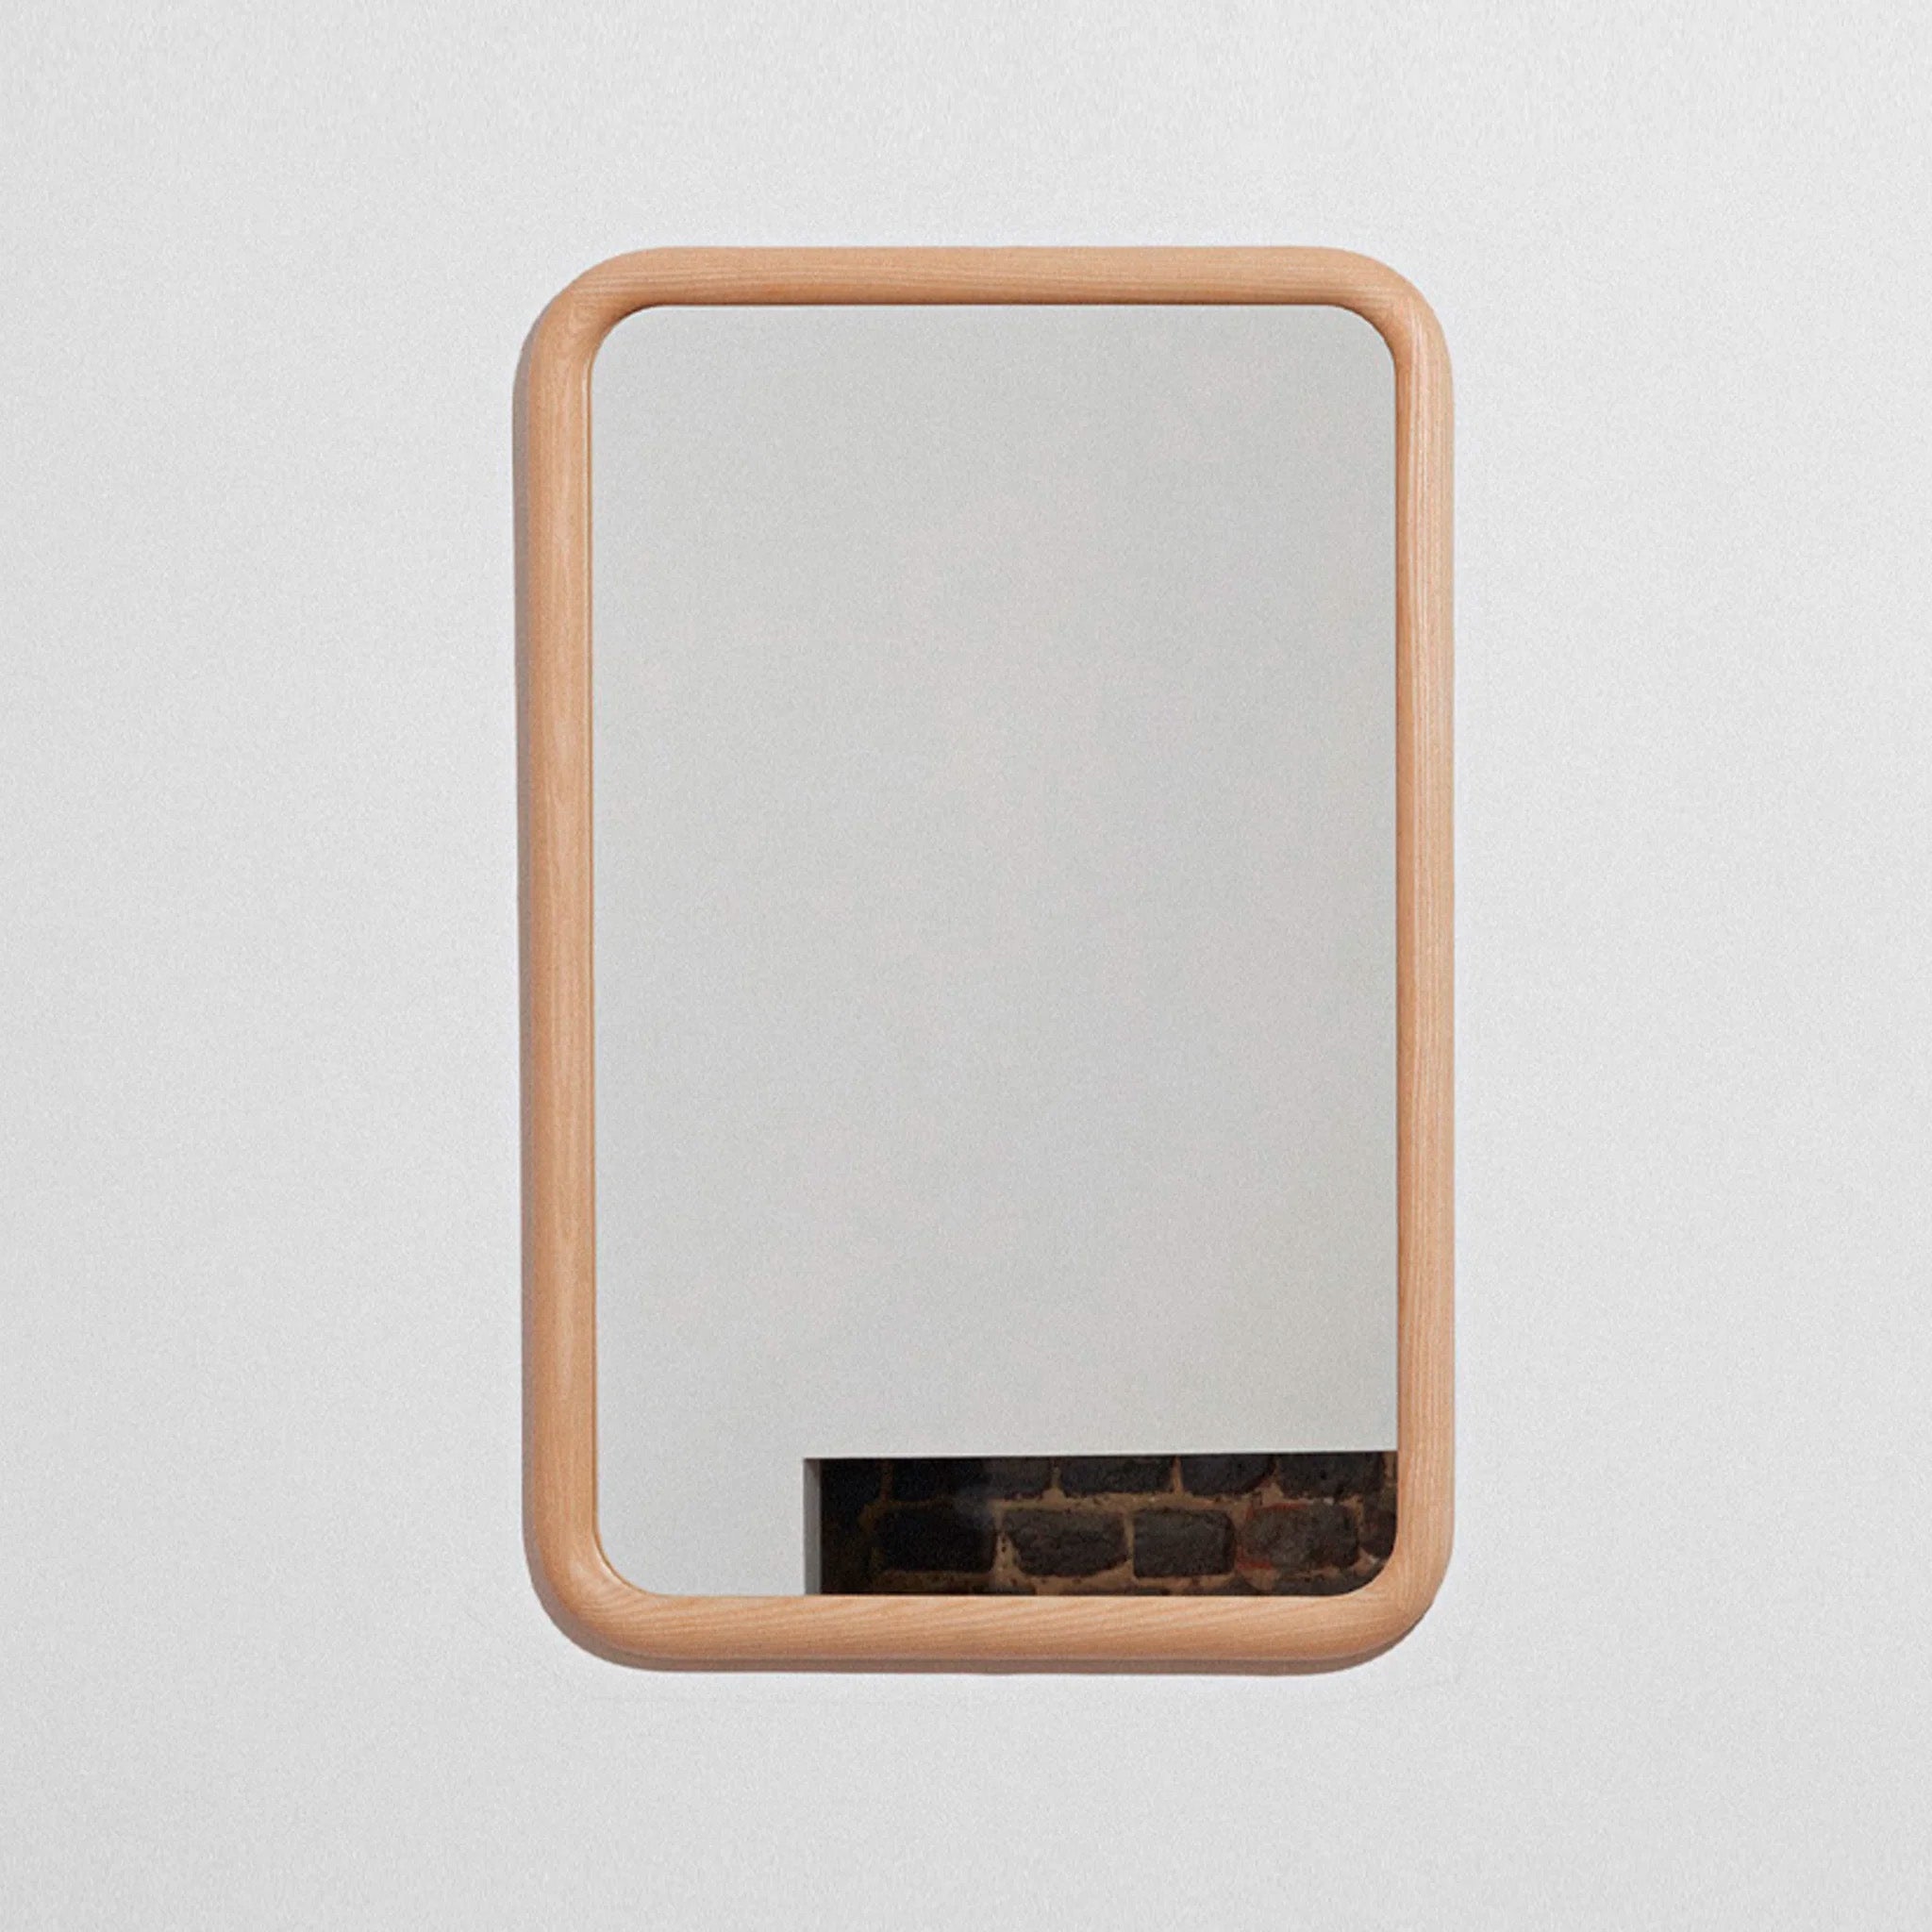 R40 Mirror by Sebastian Wrong for Owl